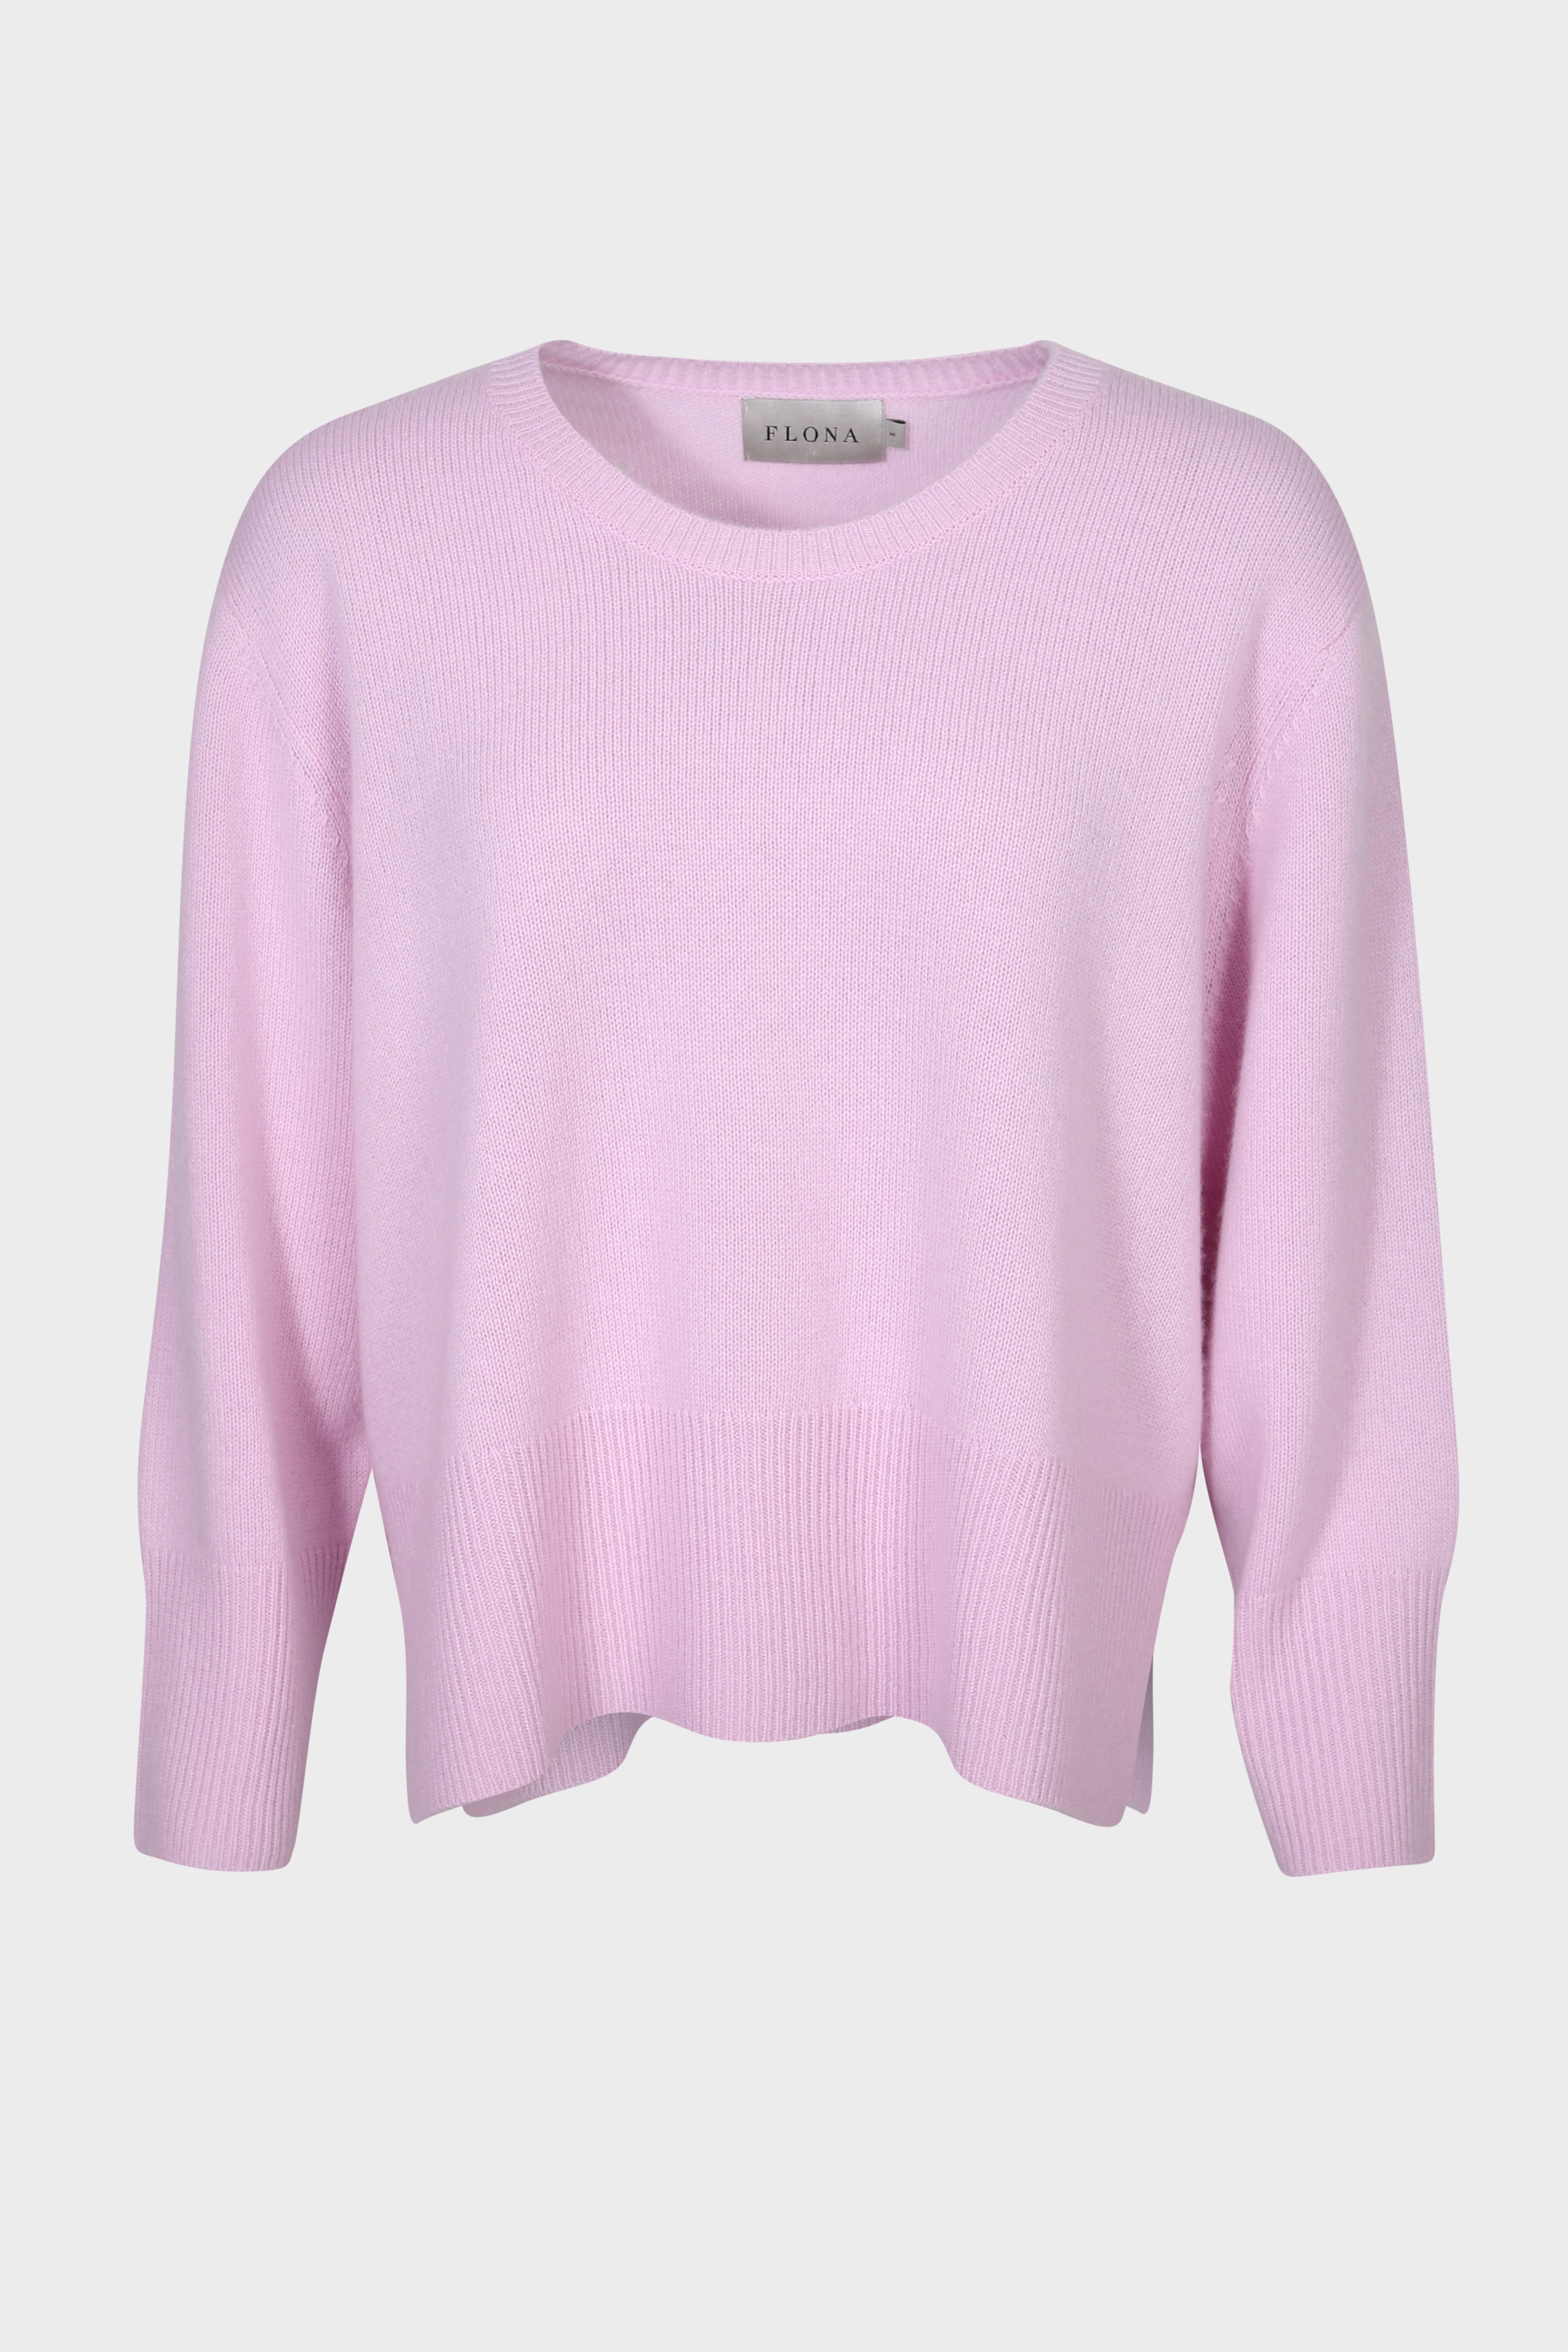 FLONA Cashmere Sweater in Pink